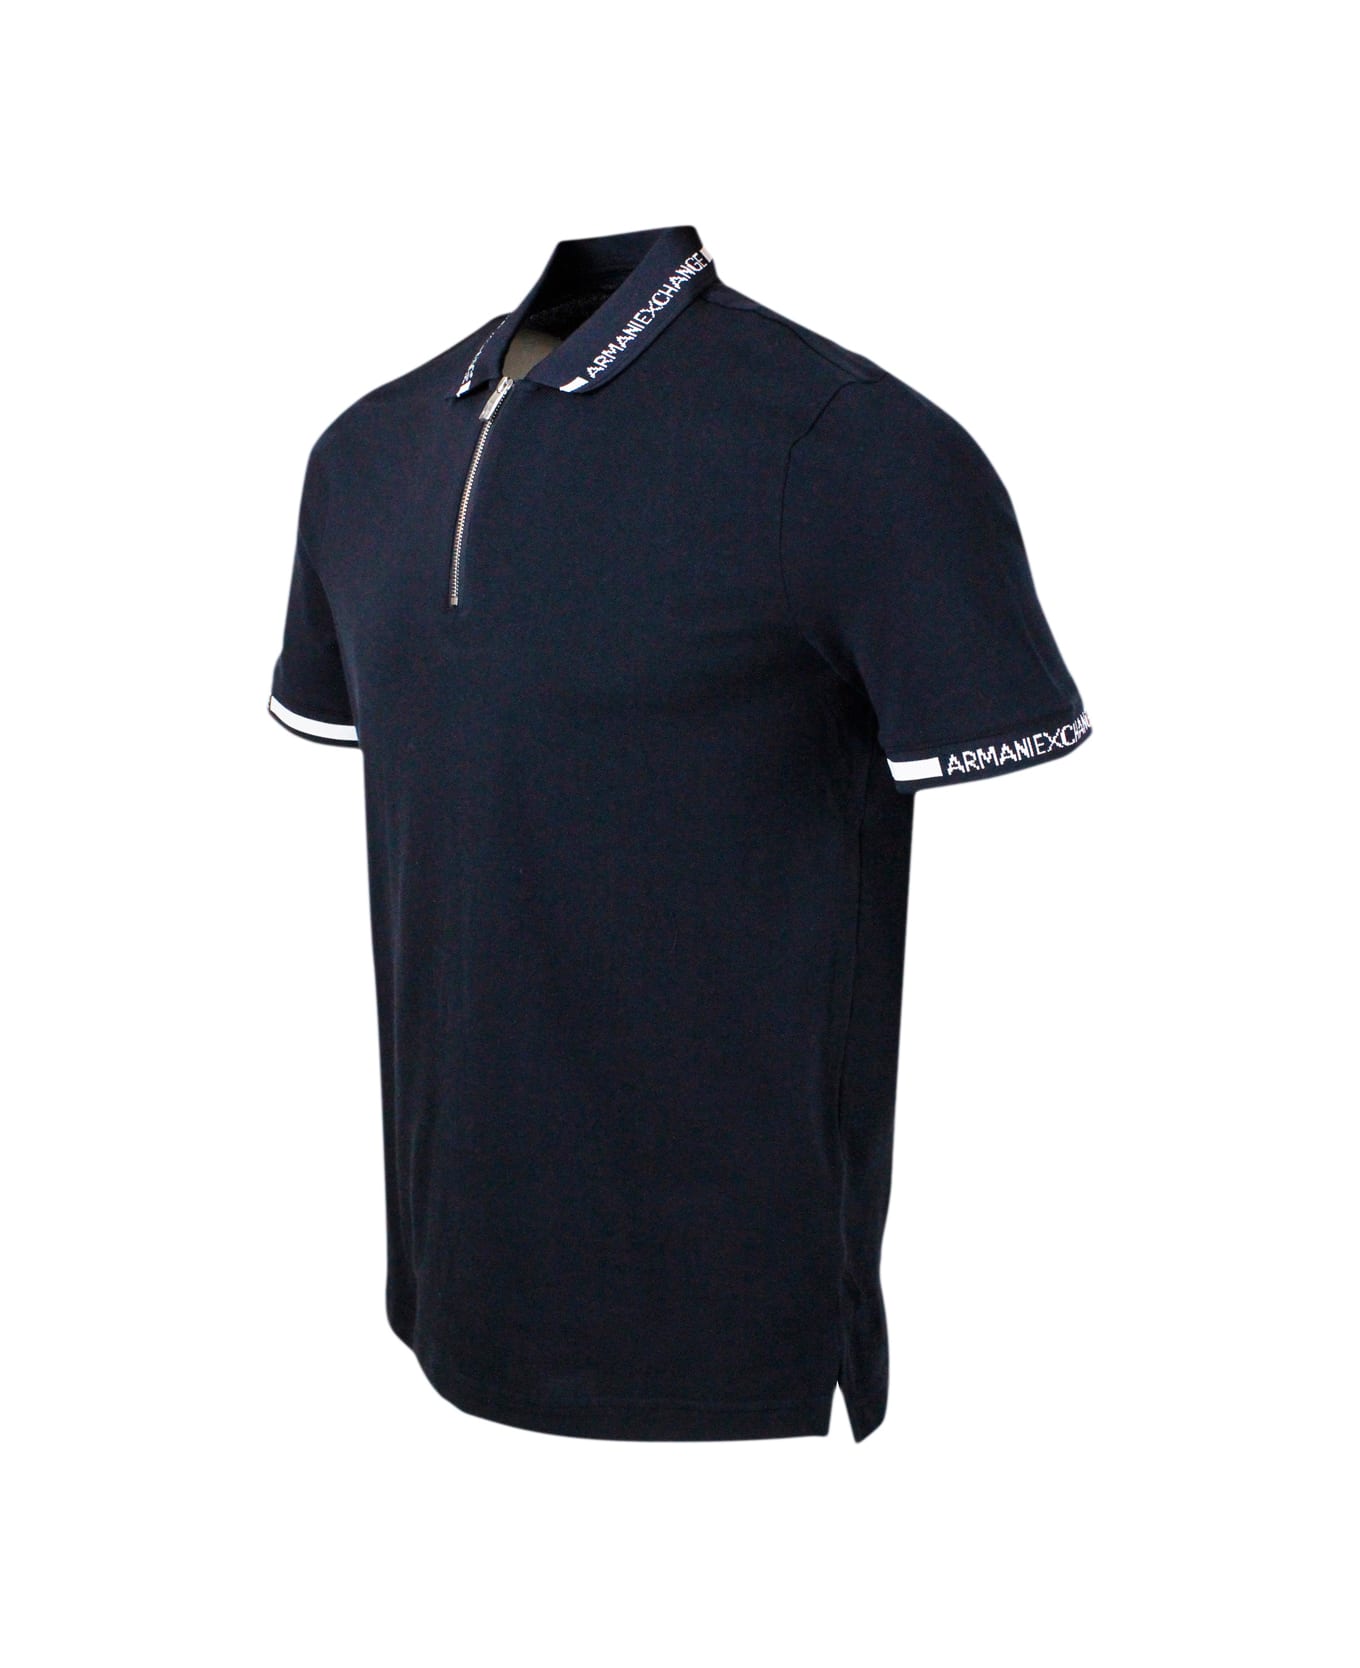 Armani Collezioni Hort-sleeved Pique Cotton Polo Shirt With Zip Closure And Writing On The Collar - Blue